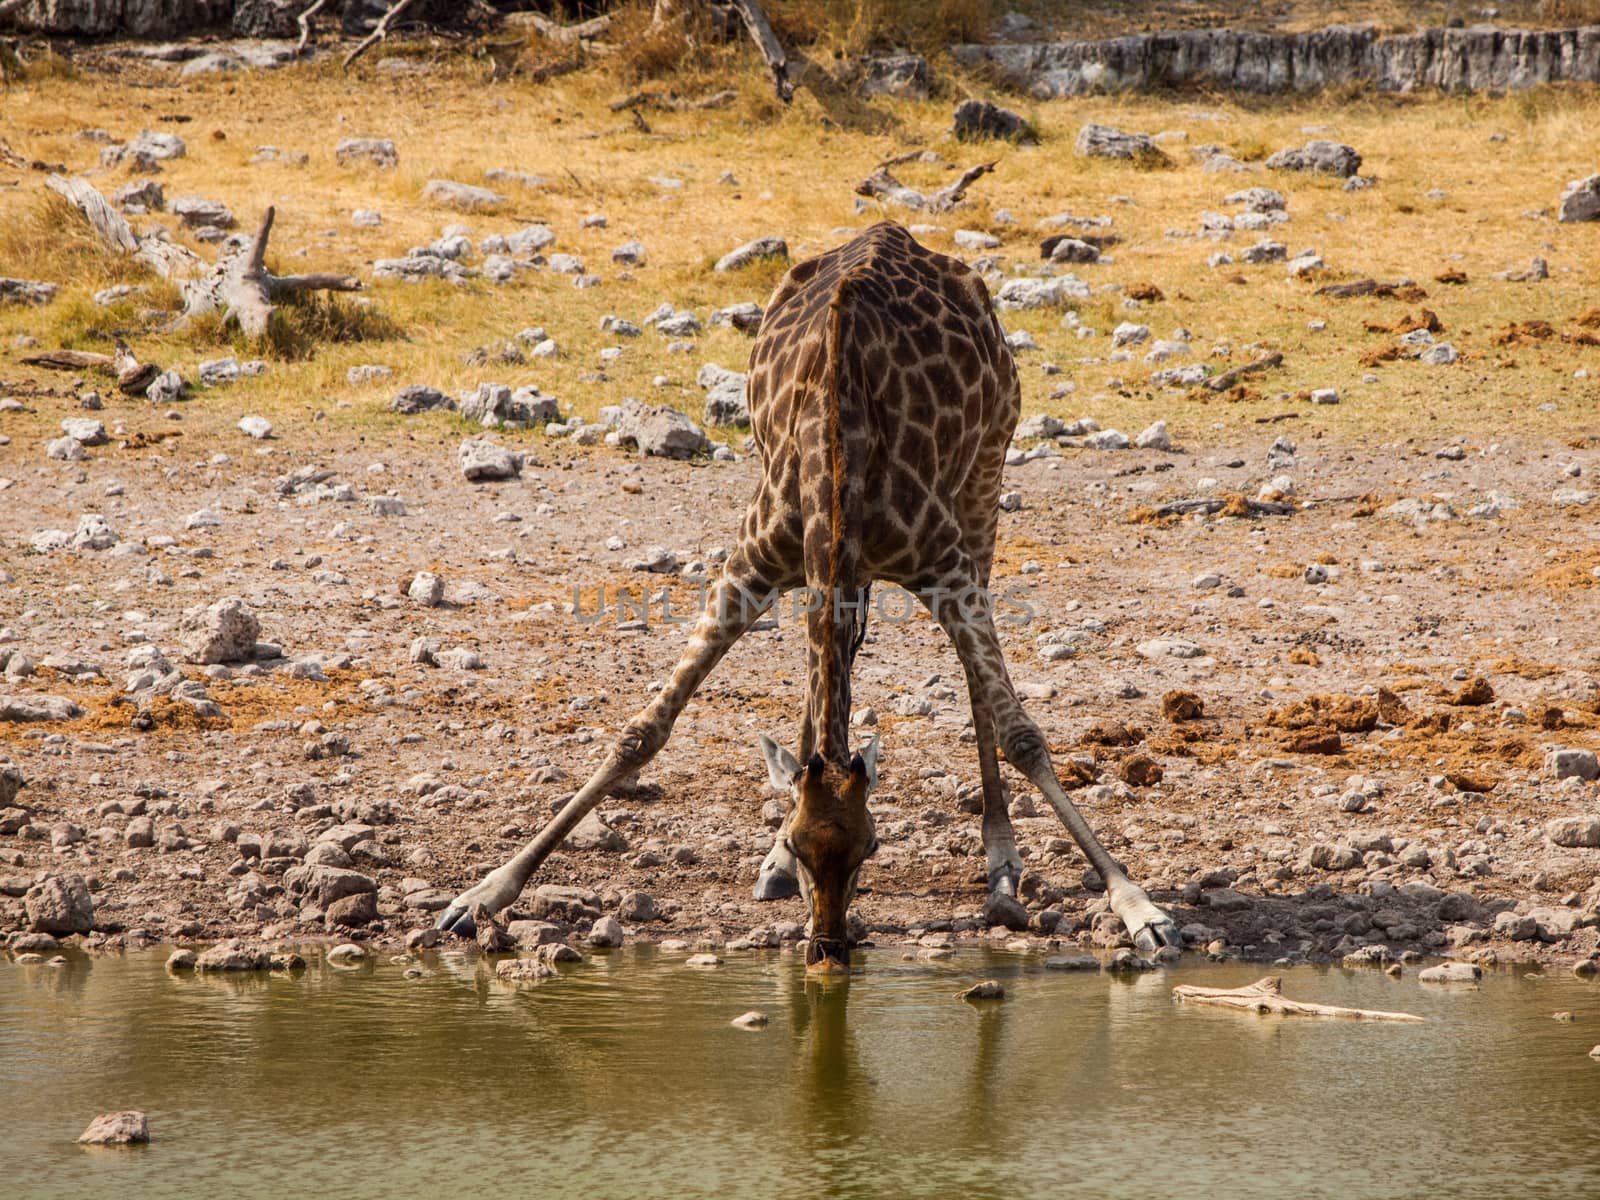 Thirsty giraffe drinking from waterhole by pyty